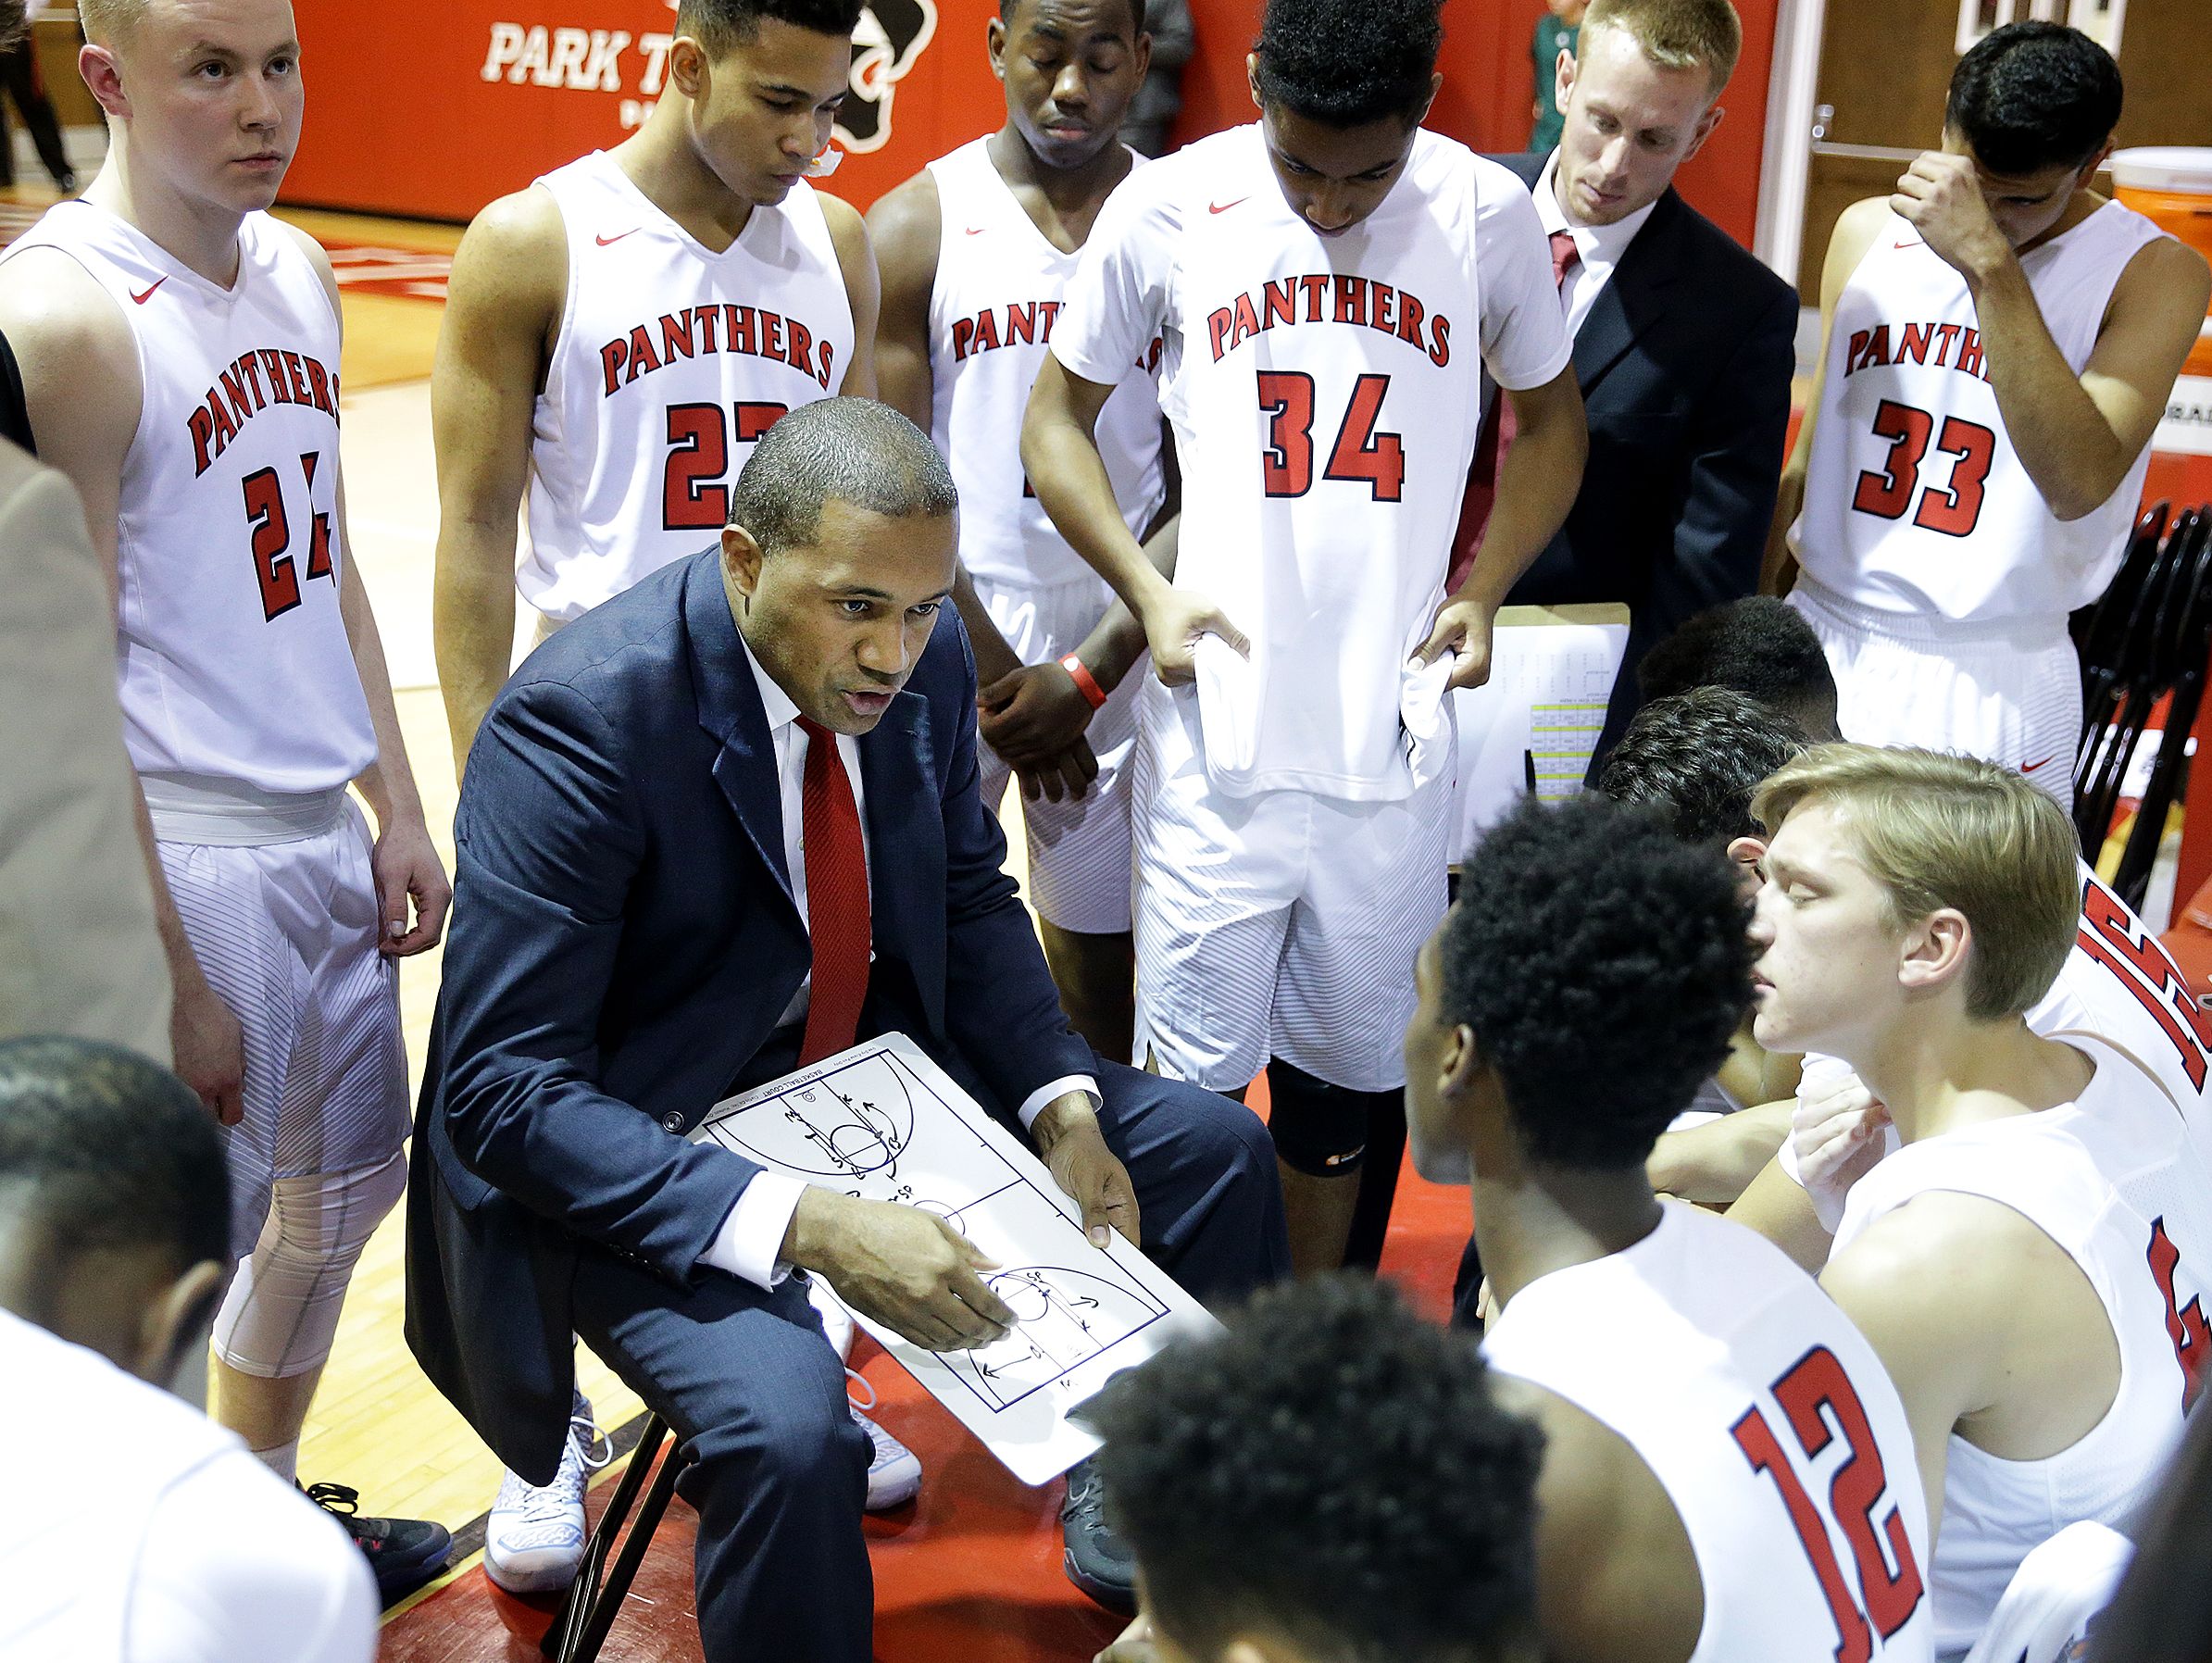 First-year Park Tudor coach Michael Shelton has a tricky first-round matchup with Danville.